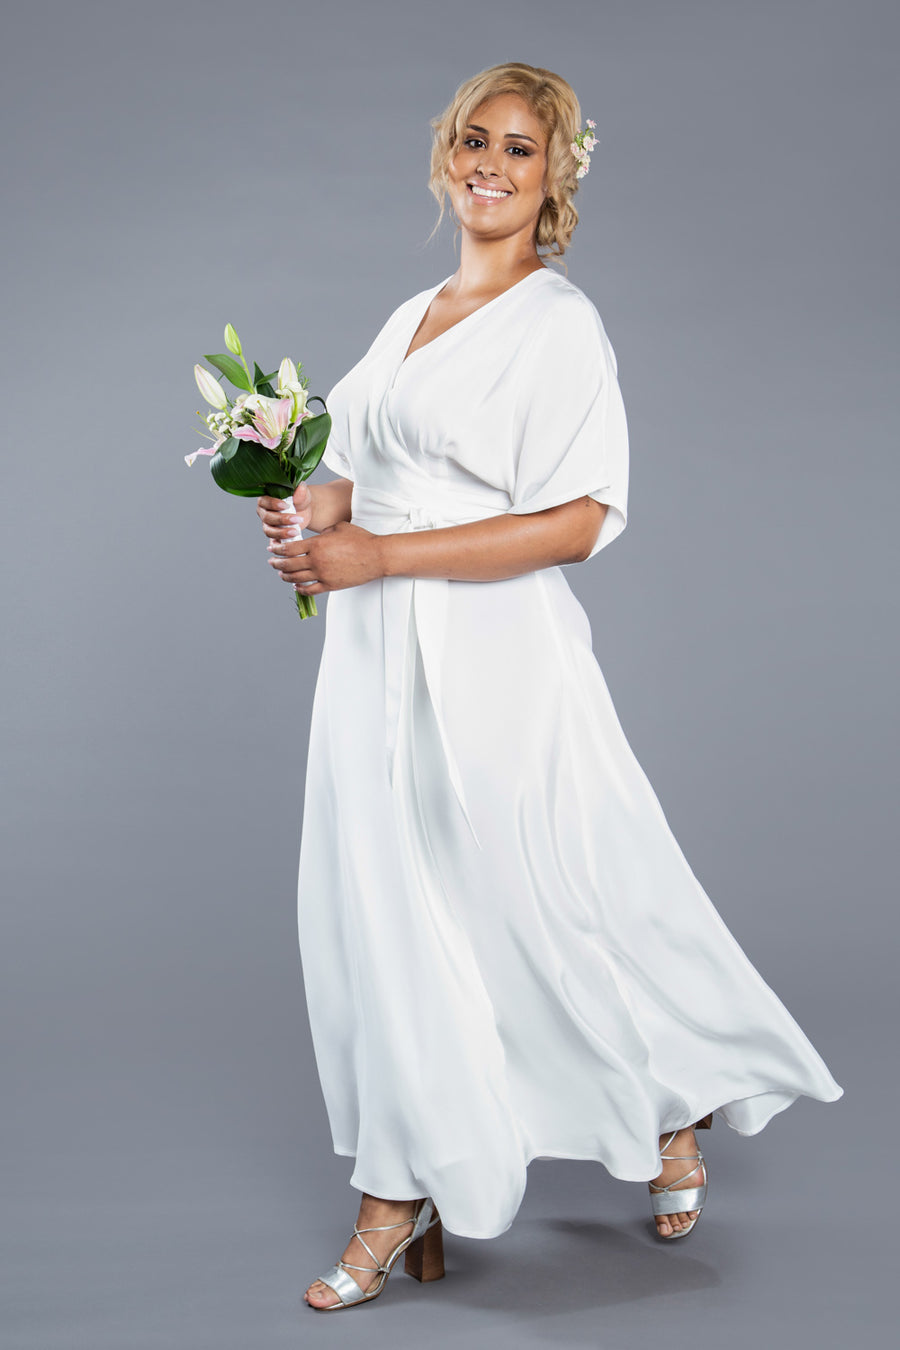 Amazon.com: McCall's 8559 Sewing Pattern Alicyn Bridal Gown Size 10 - 12 -  14 : Arts, Crafts & Sewing